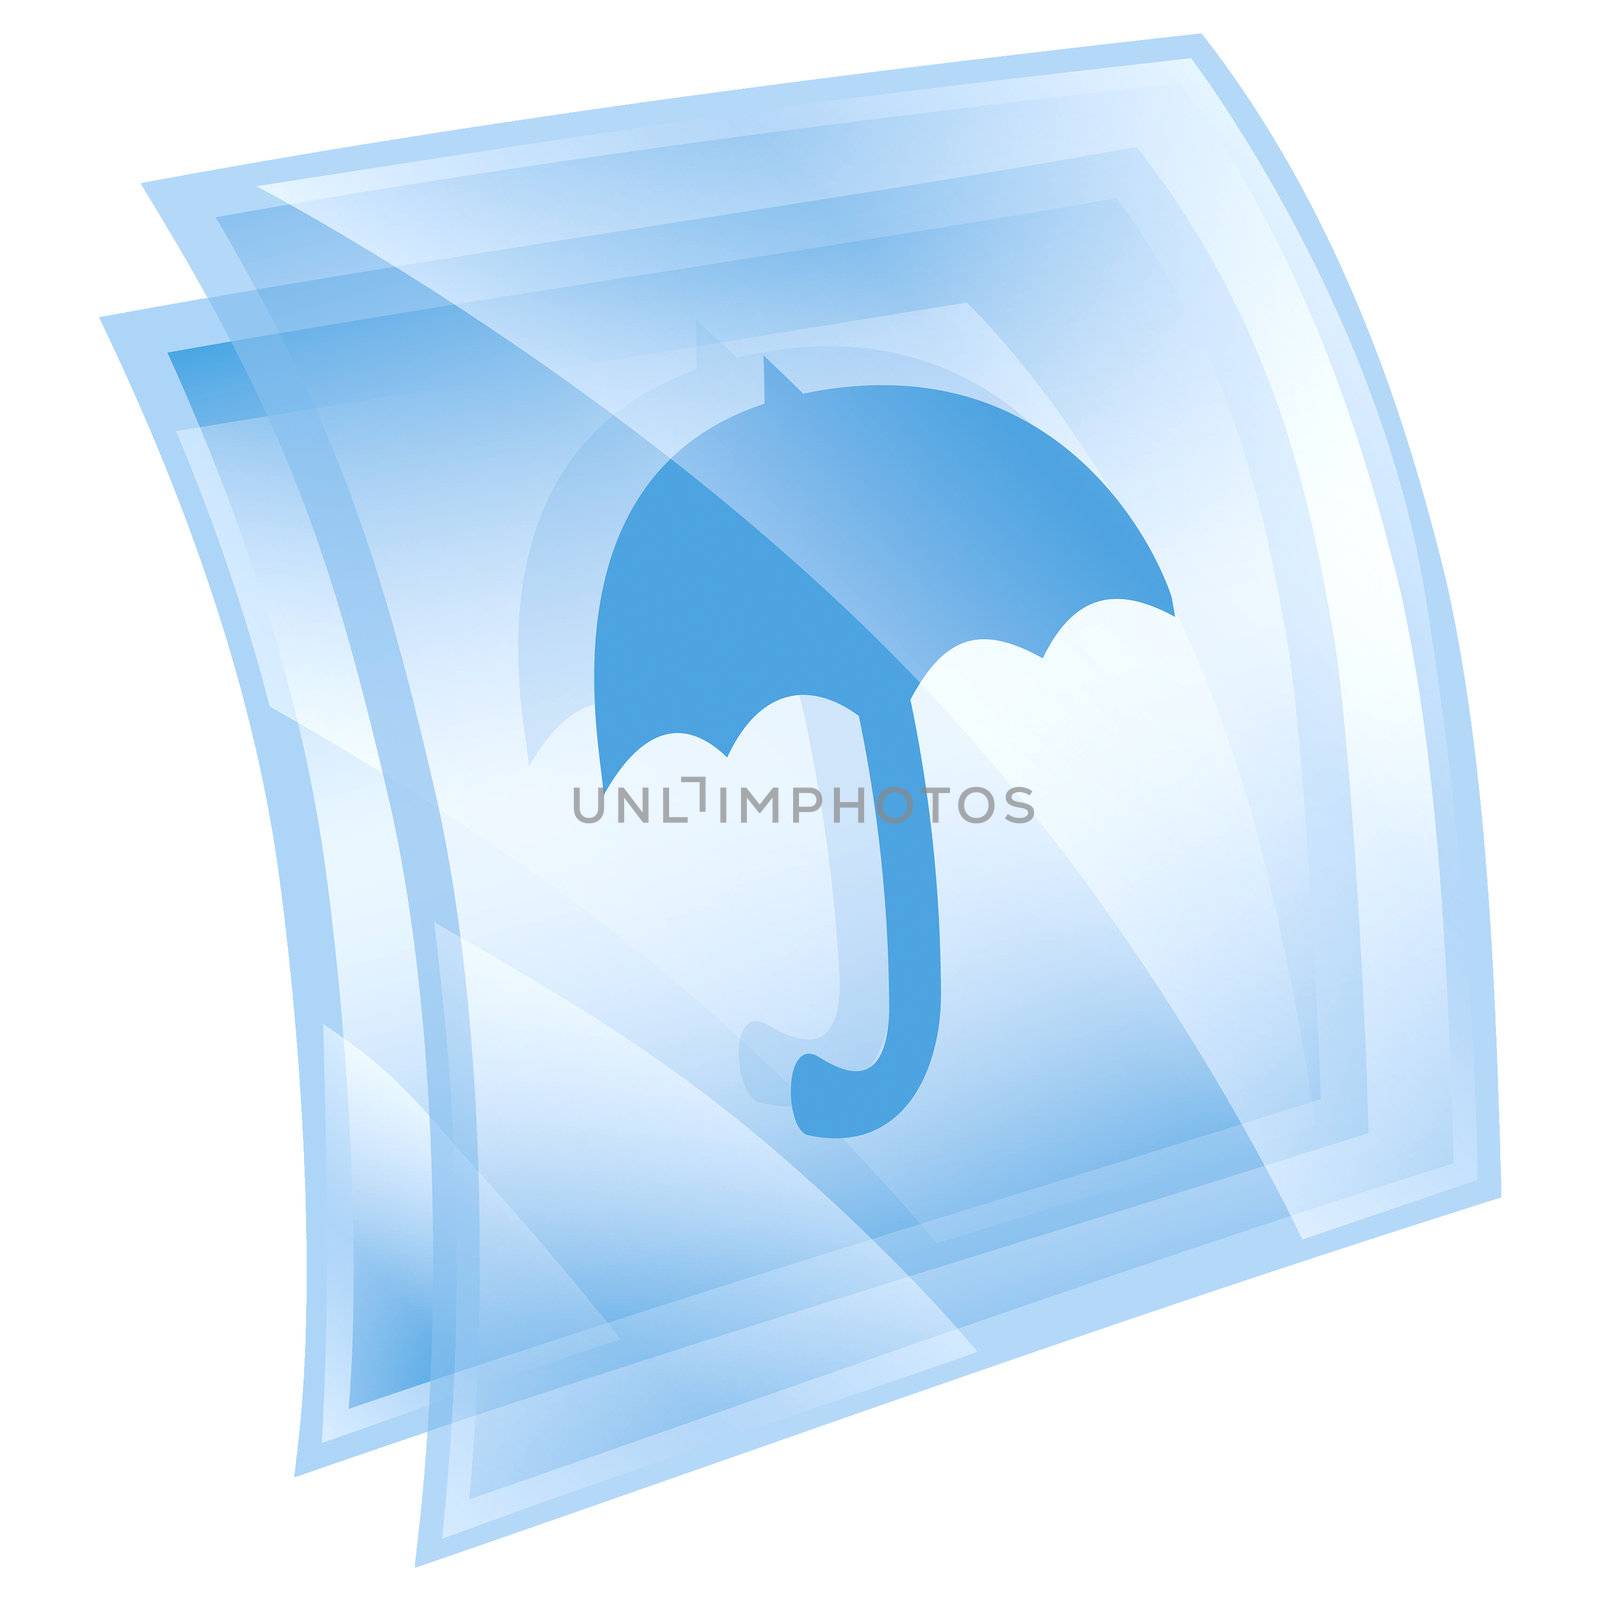 Umbrella icon blue, isolated on white background by zeffss